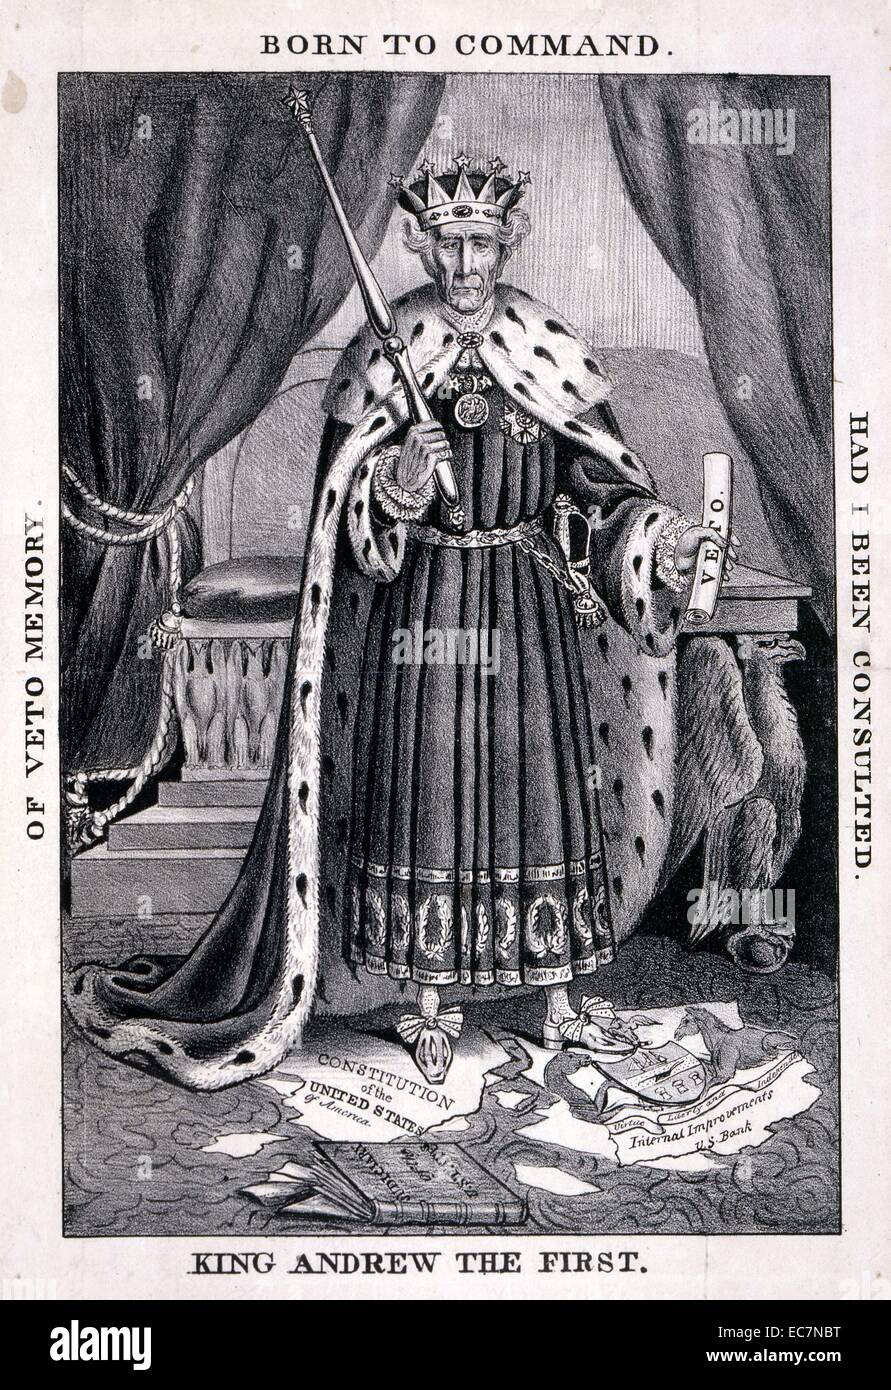 King Andrew the First. A caricature of Andrew Jackson as a despotic monarch, probably issued during the Fall of 1833 in response to the President's September order to remove federal deposits from the Bank of the United States. The print is dated a year earlier by Weitenkampf and related to Jackson's controversial veto of Congress's bill to recharter the Bank in July 1832. The general consensus was that Jackson was exceeding the President's constitutional power. Stock Photo